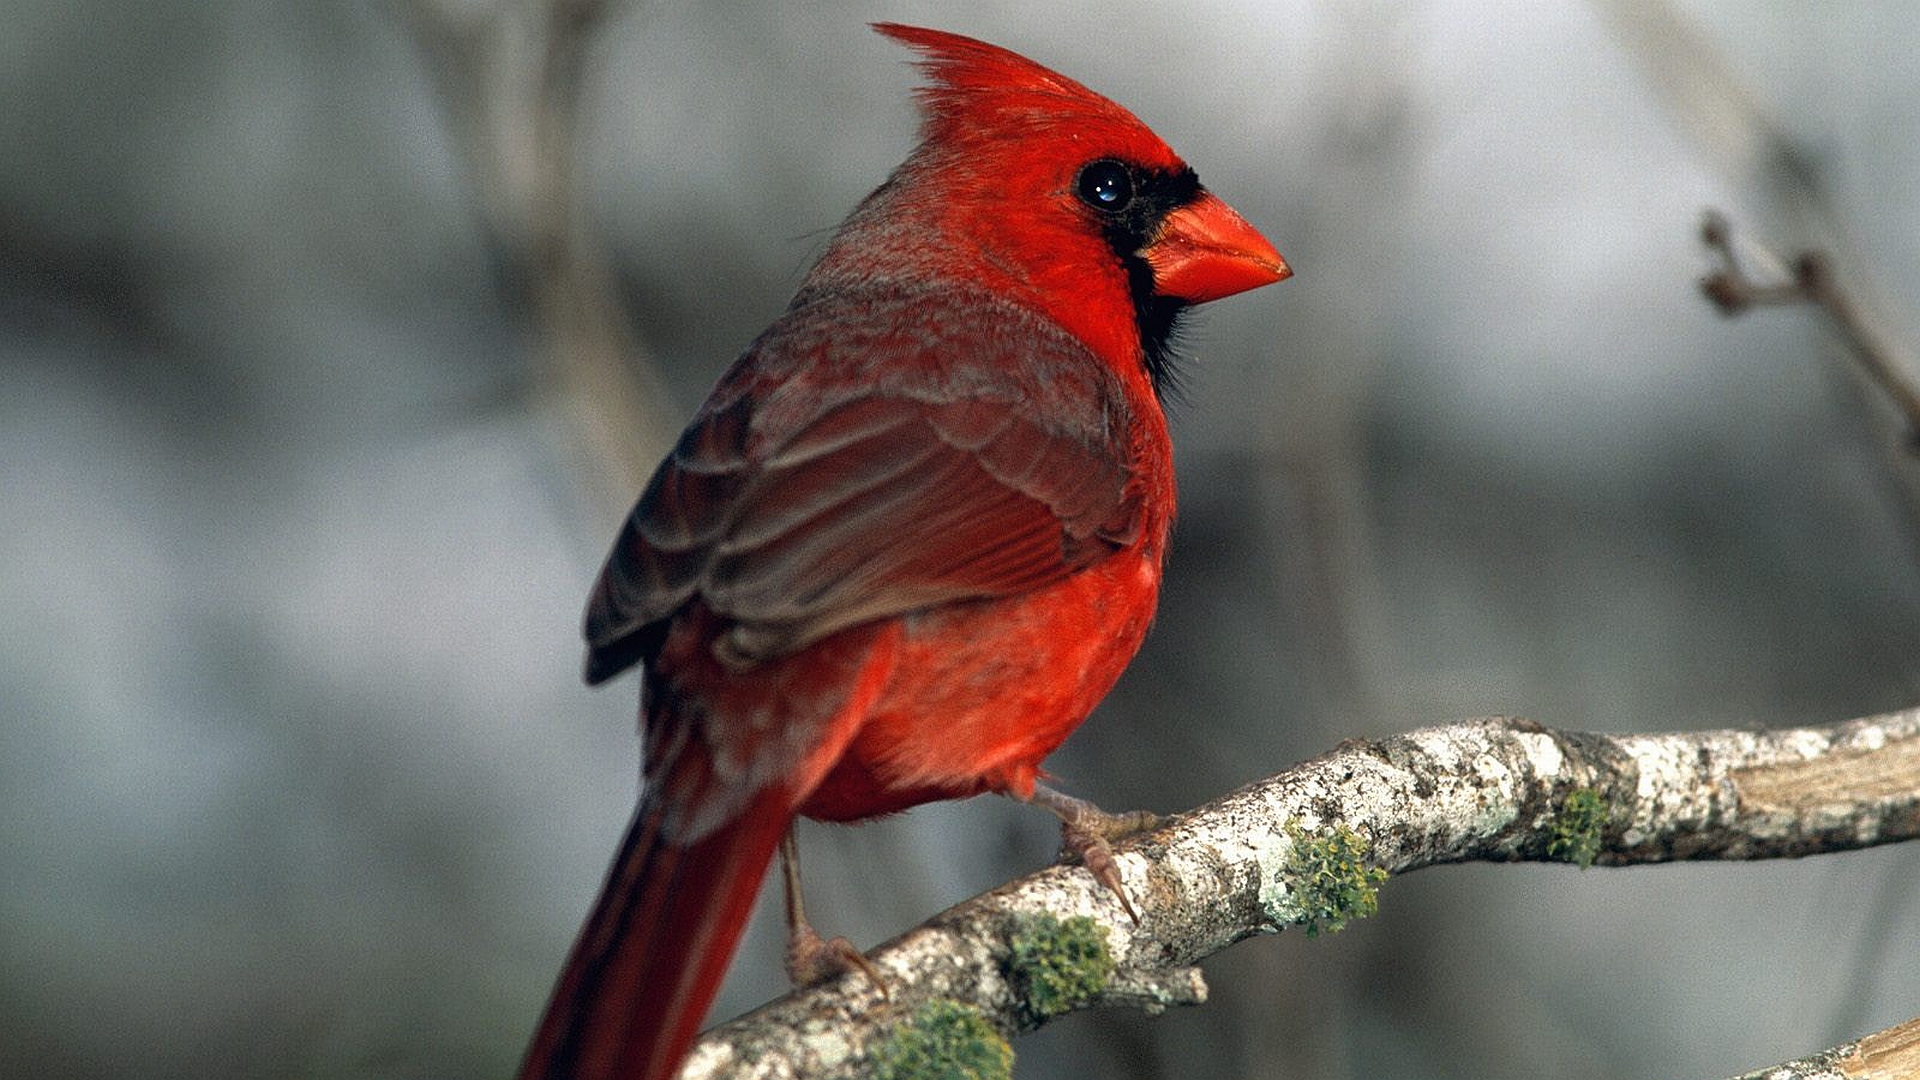 A majestic cardinal perched on a branch, displaying vibrant red plumage.